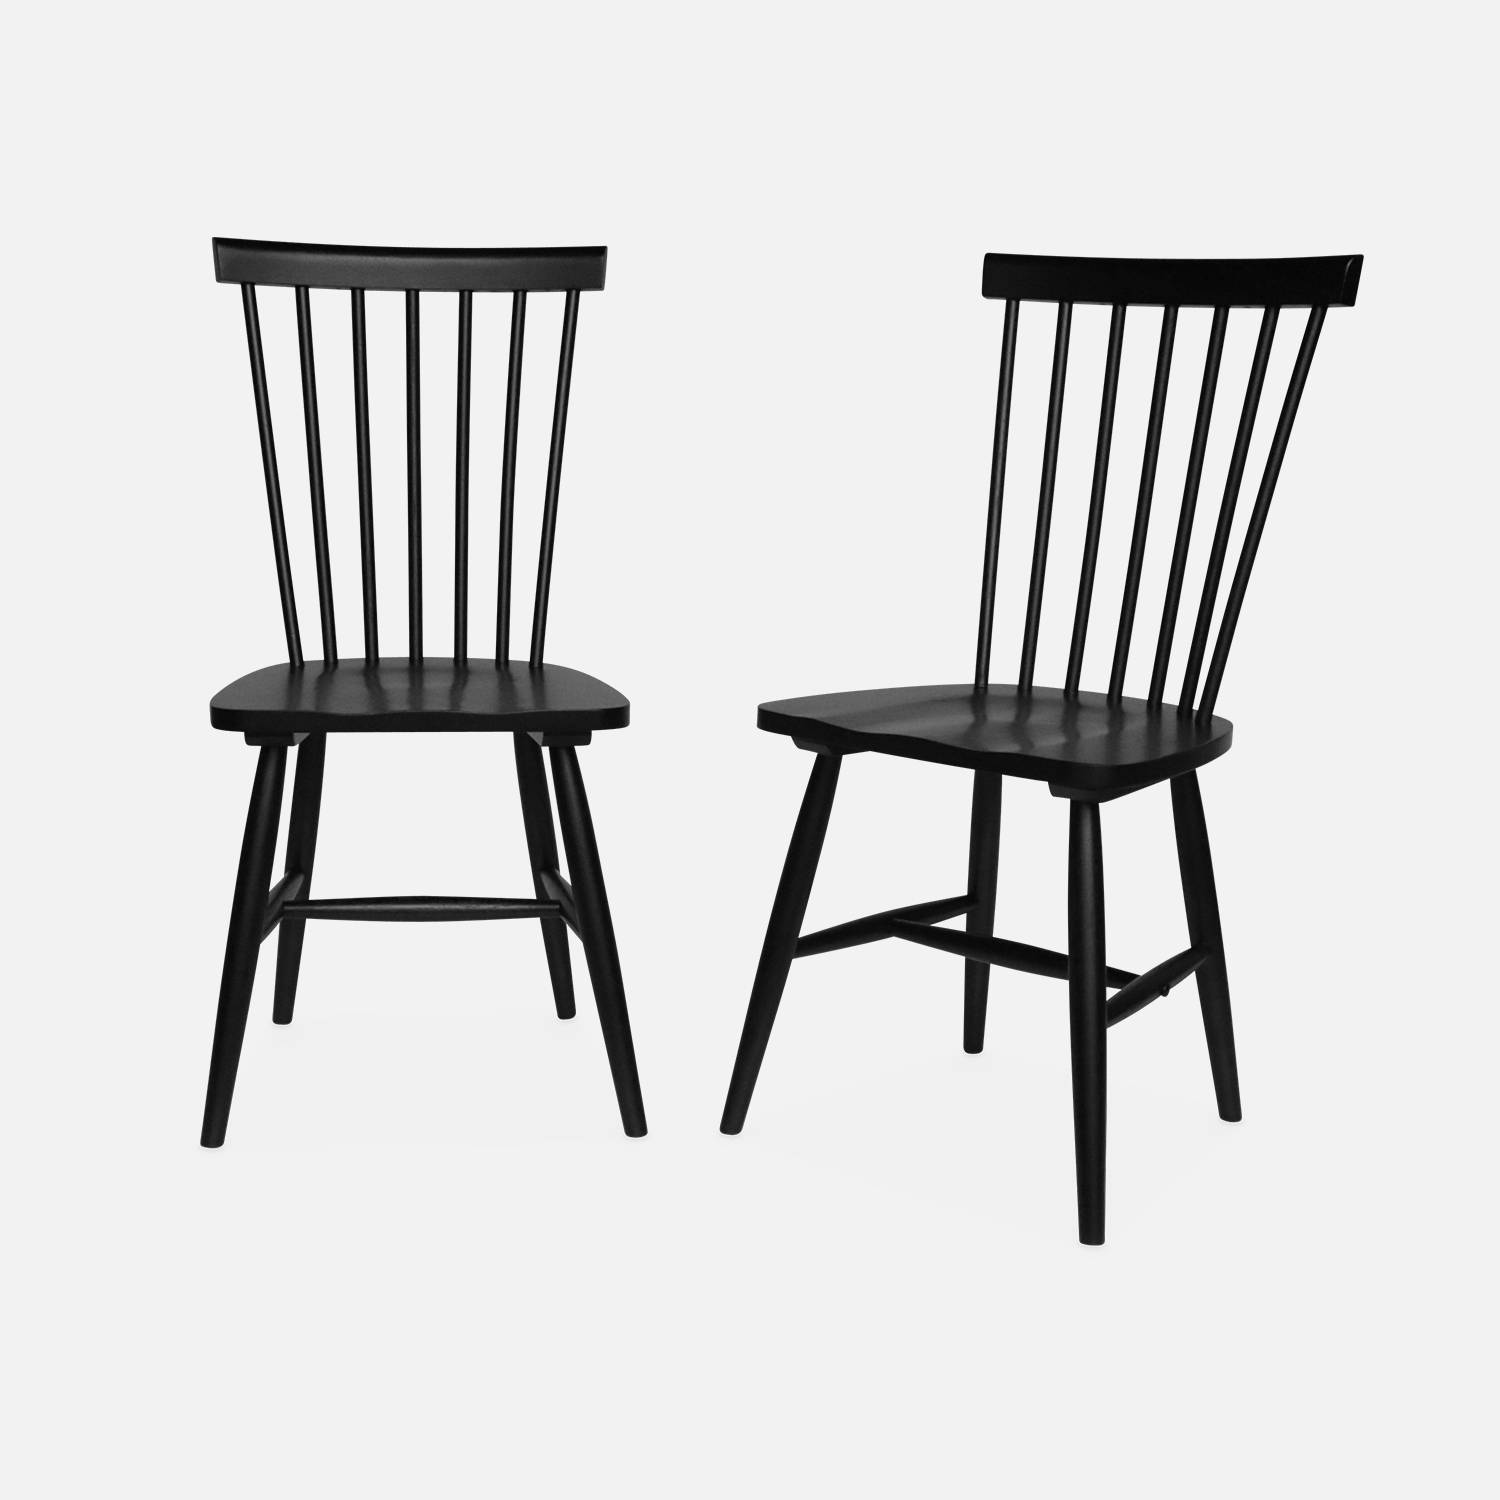 Pair of wooden dining chairs | sweeek